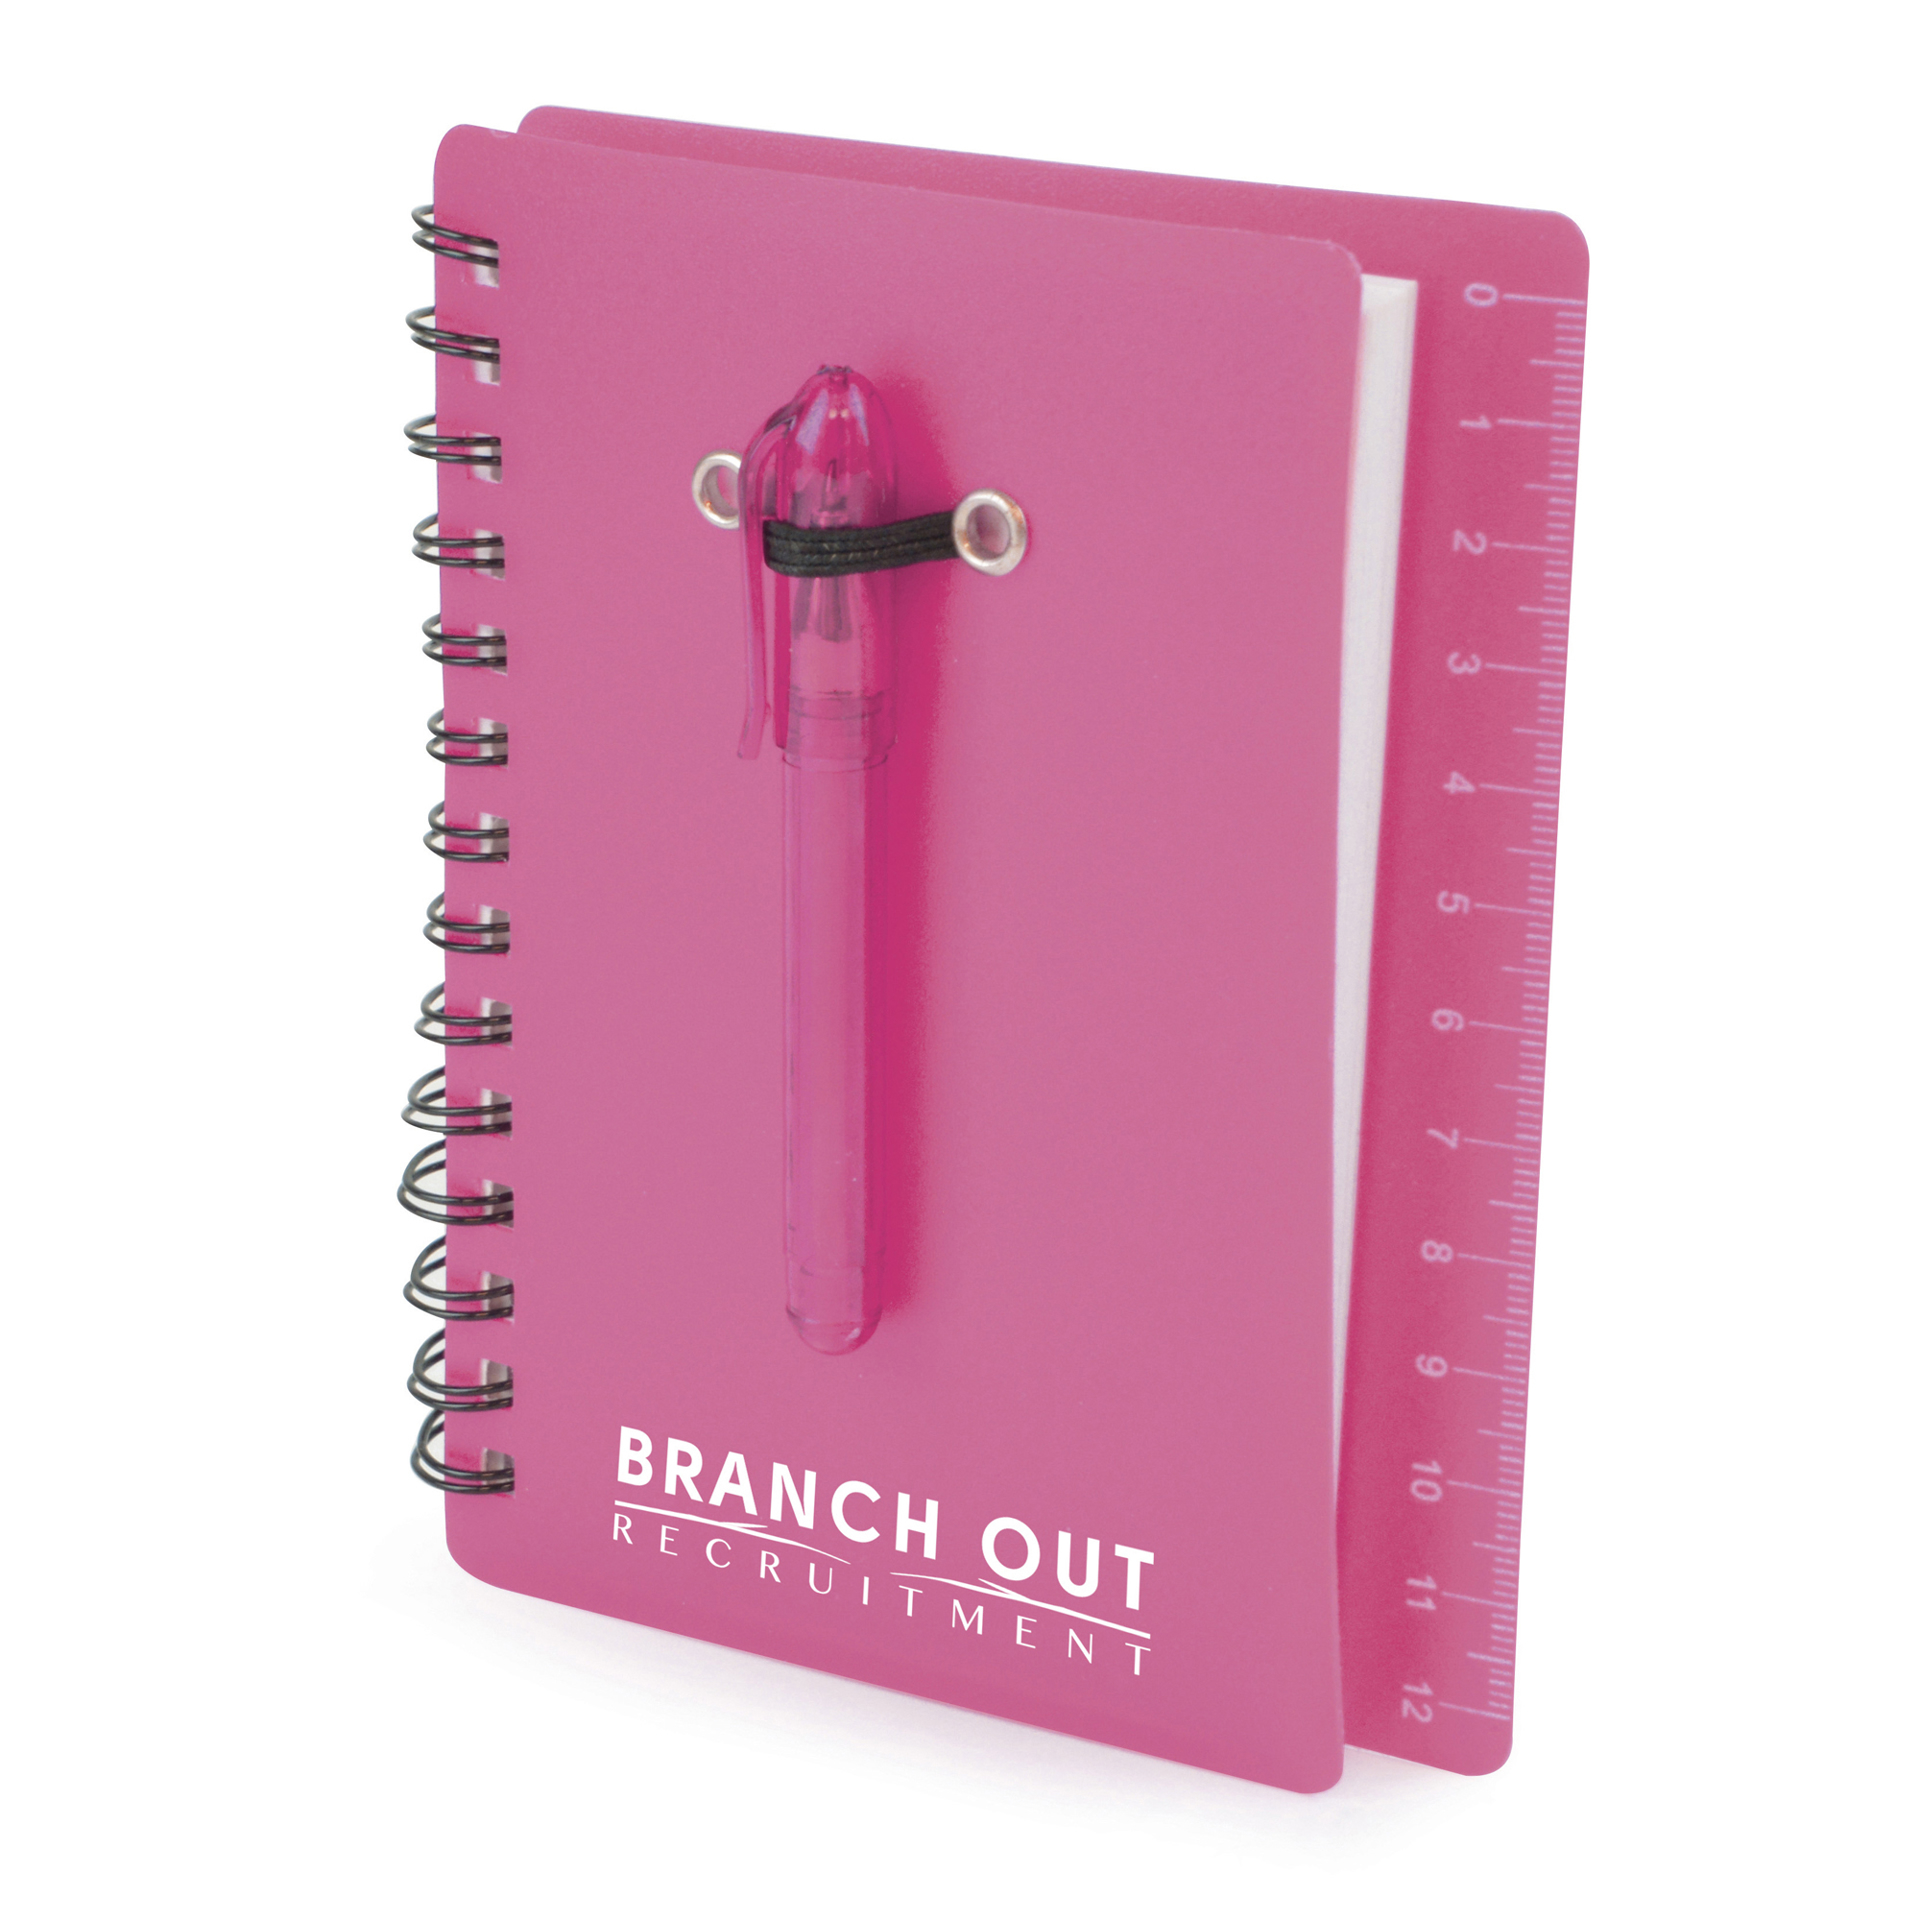 Spiral bound flexible pink plastic covered notebook with matching ball pen with back cover ruler